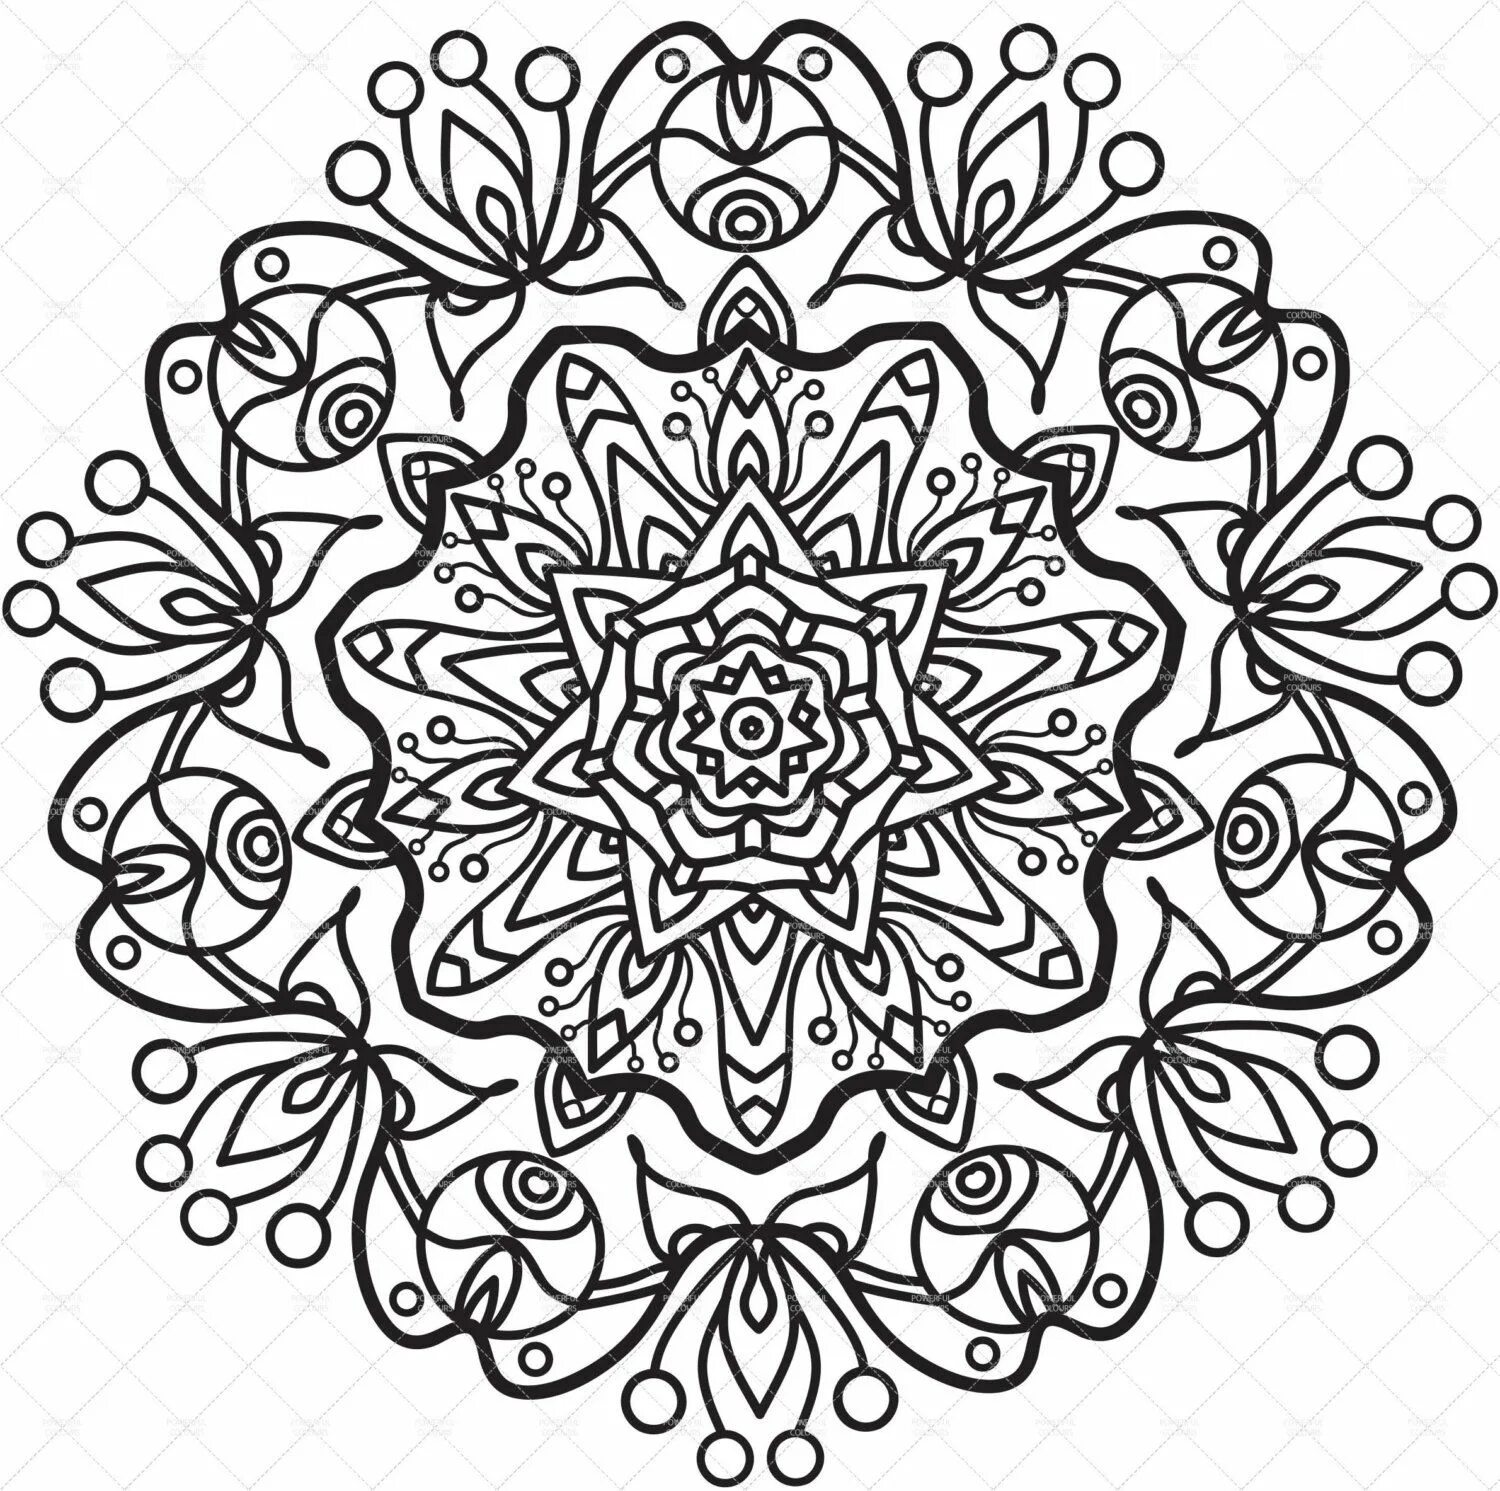 Charming coloring mandala of peace and tranquility